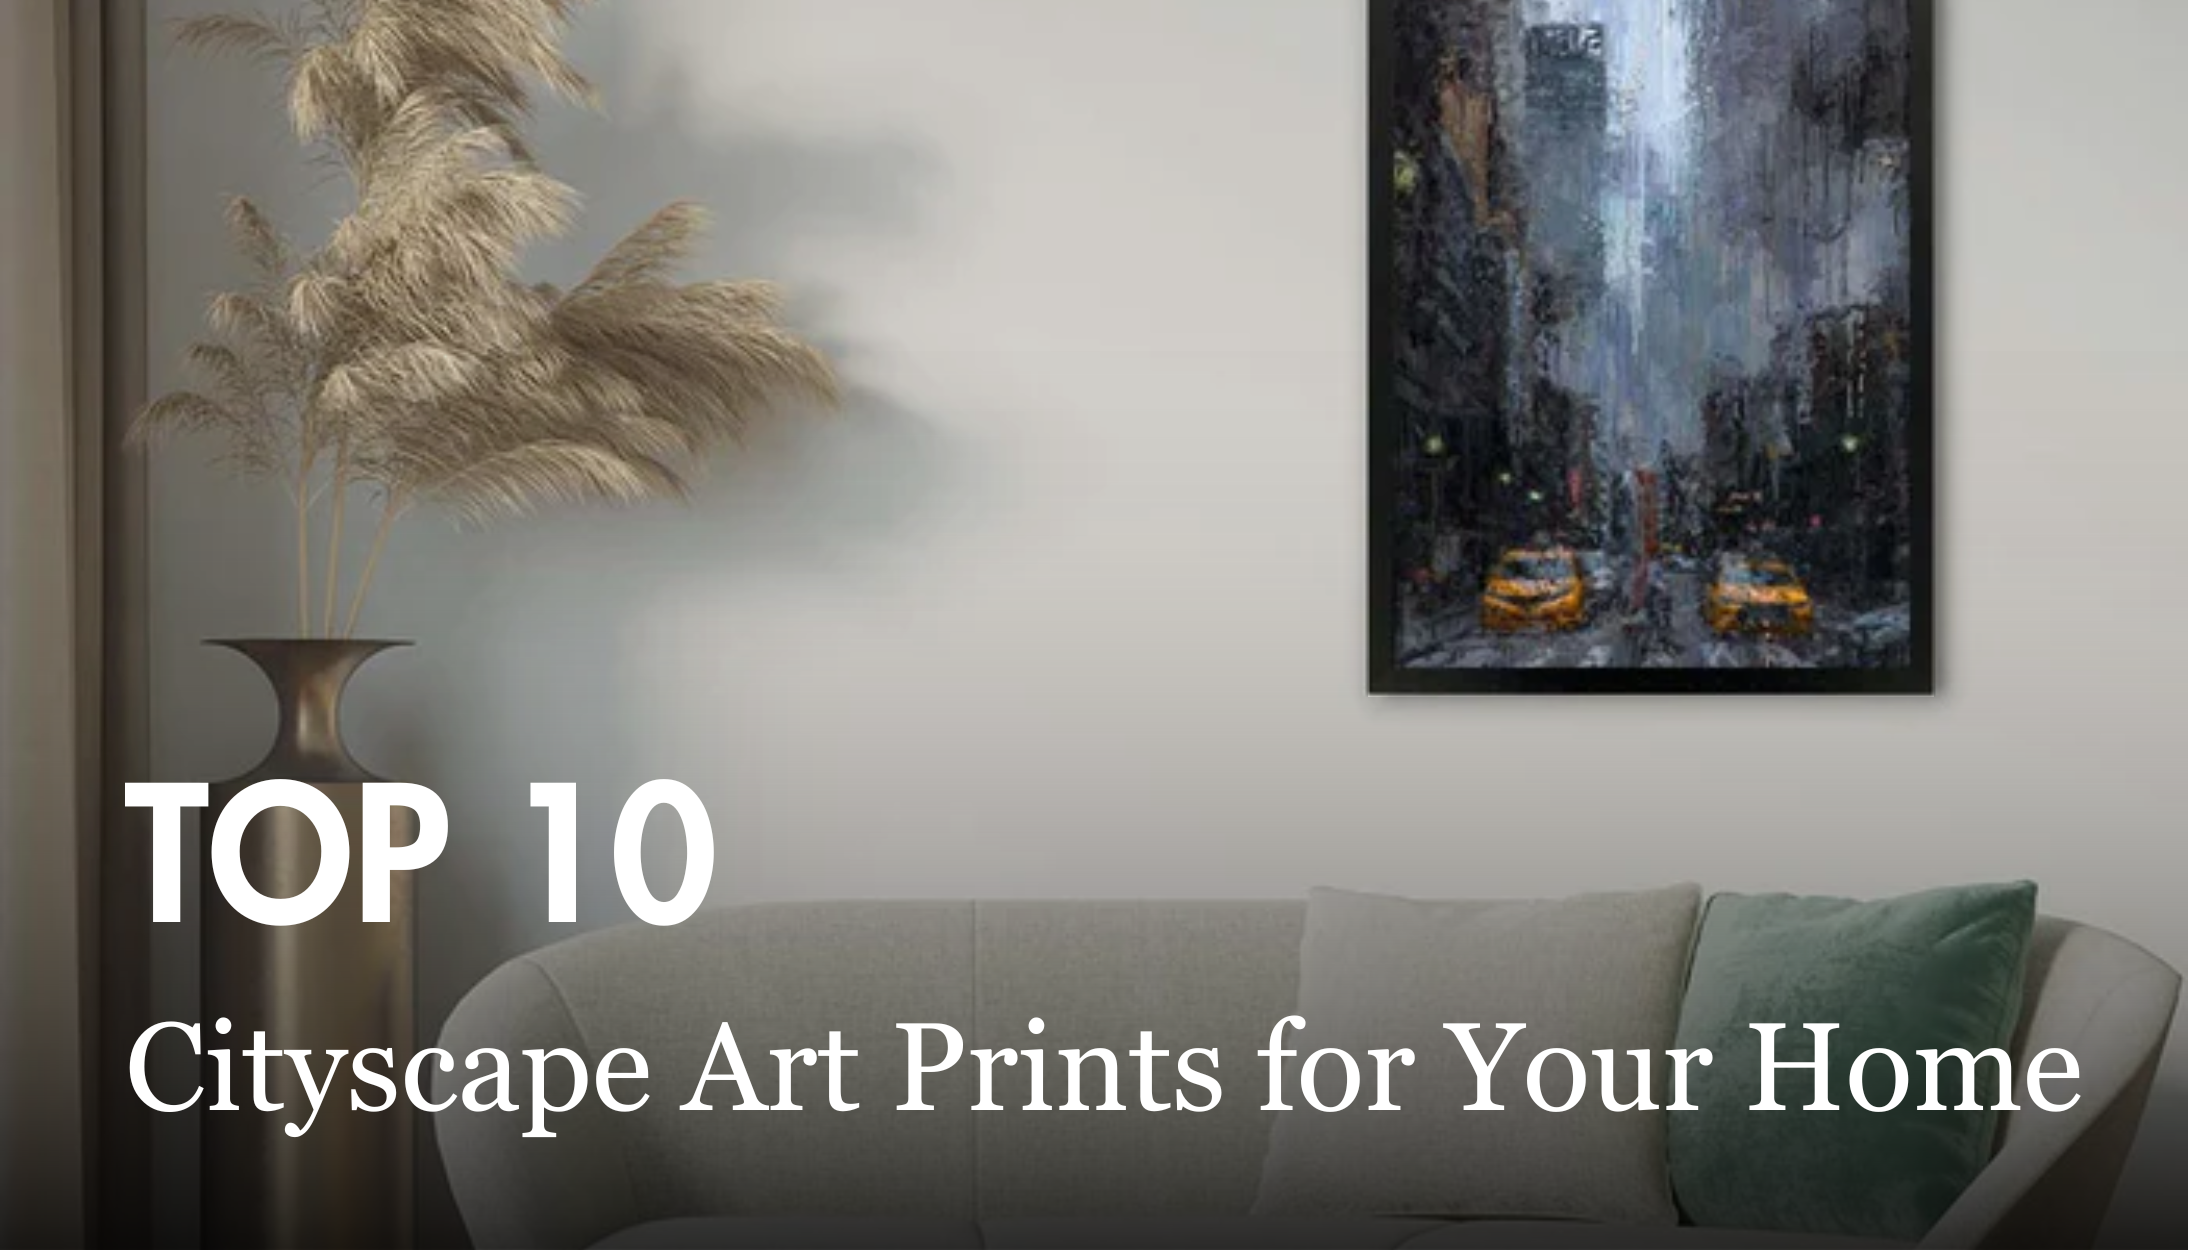 Top 10 Cityscape Art Prints for Your Home